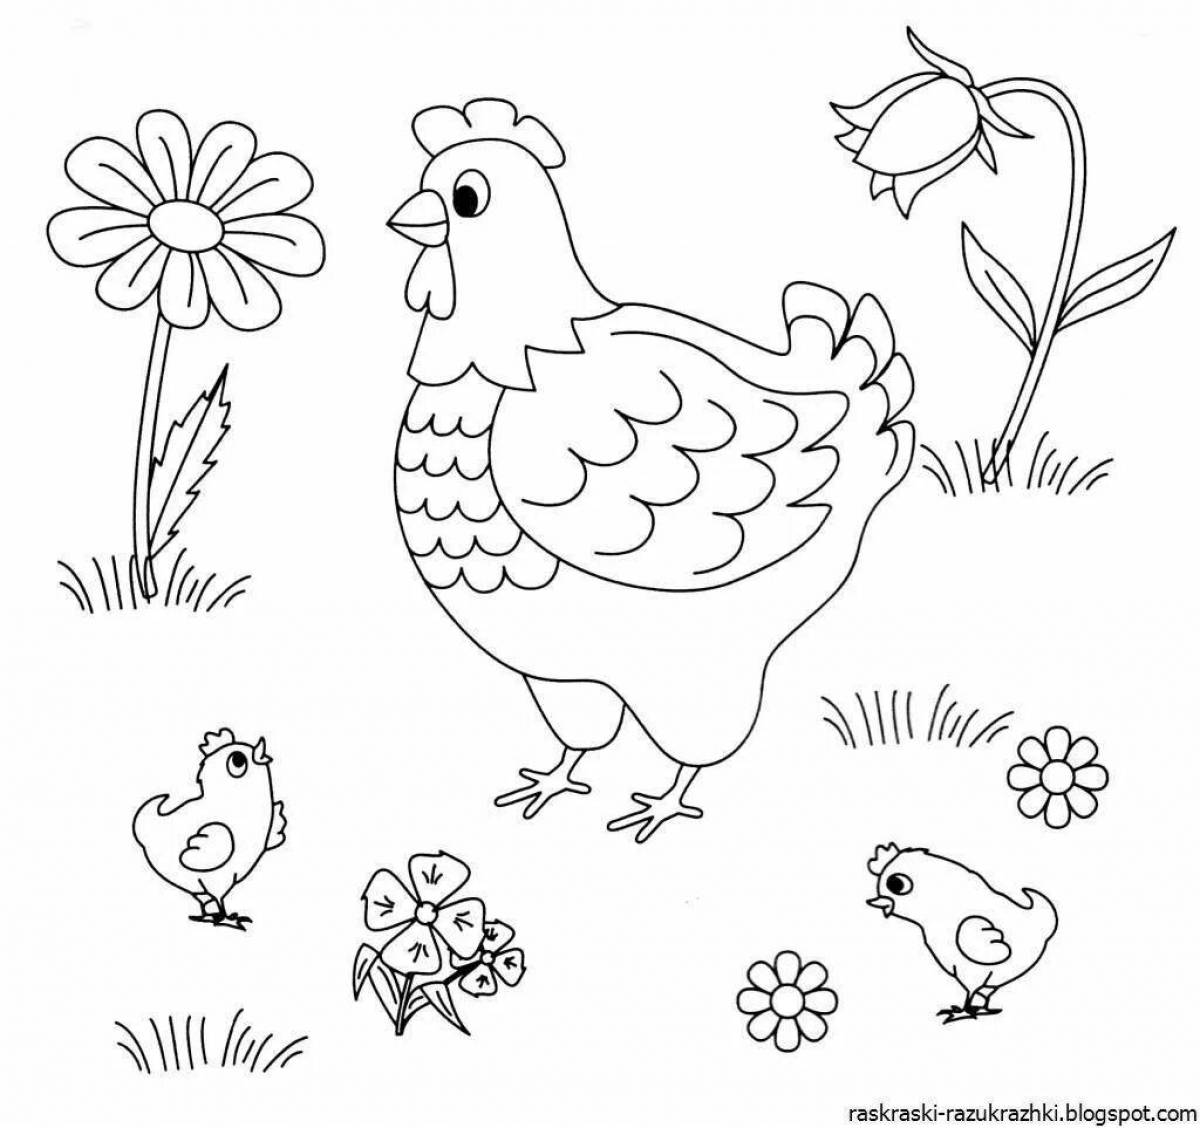 Perfect home coloring for preschoolers